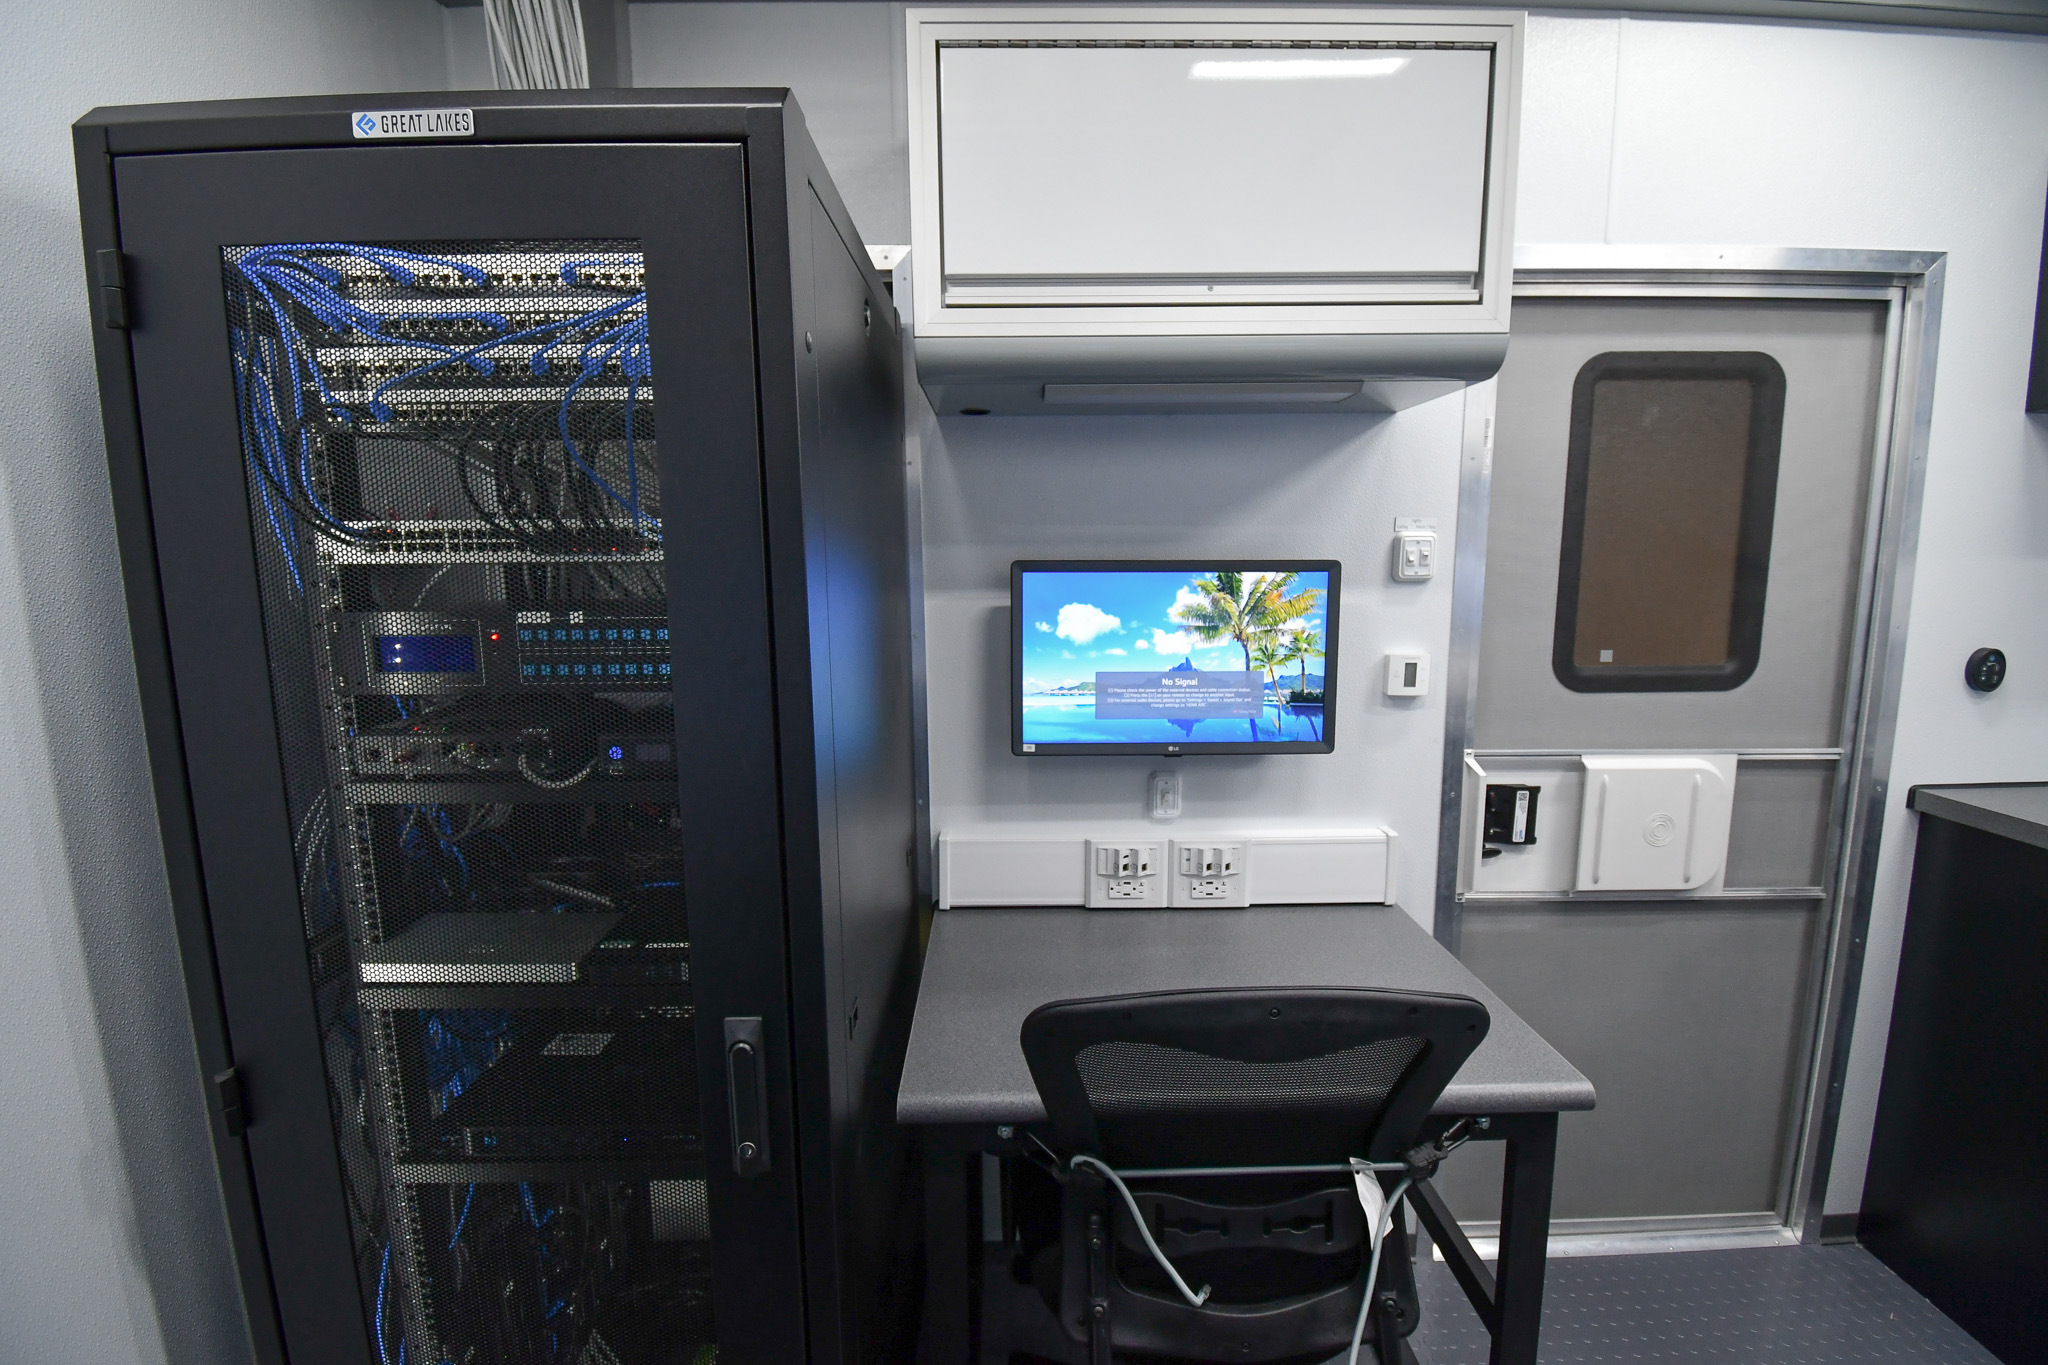 A workstation and electronics rack cabinet inside the unit for Montgomery County, TN.